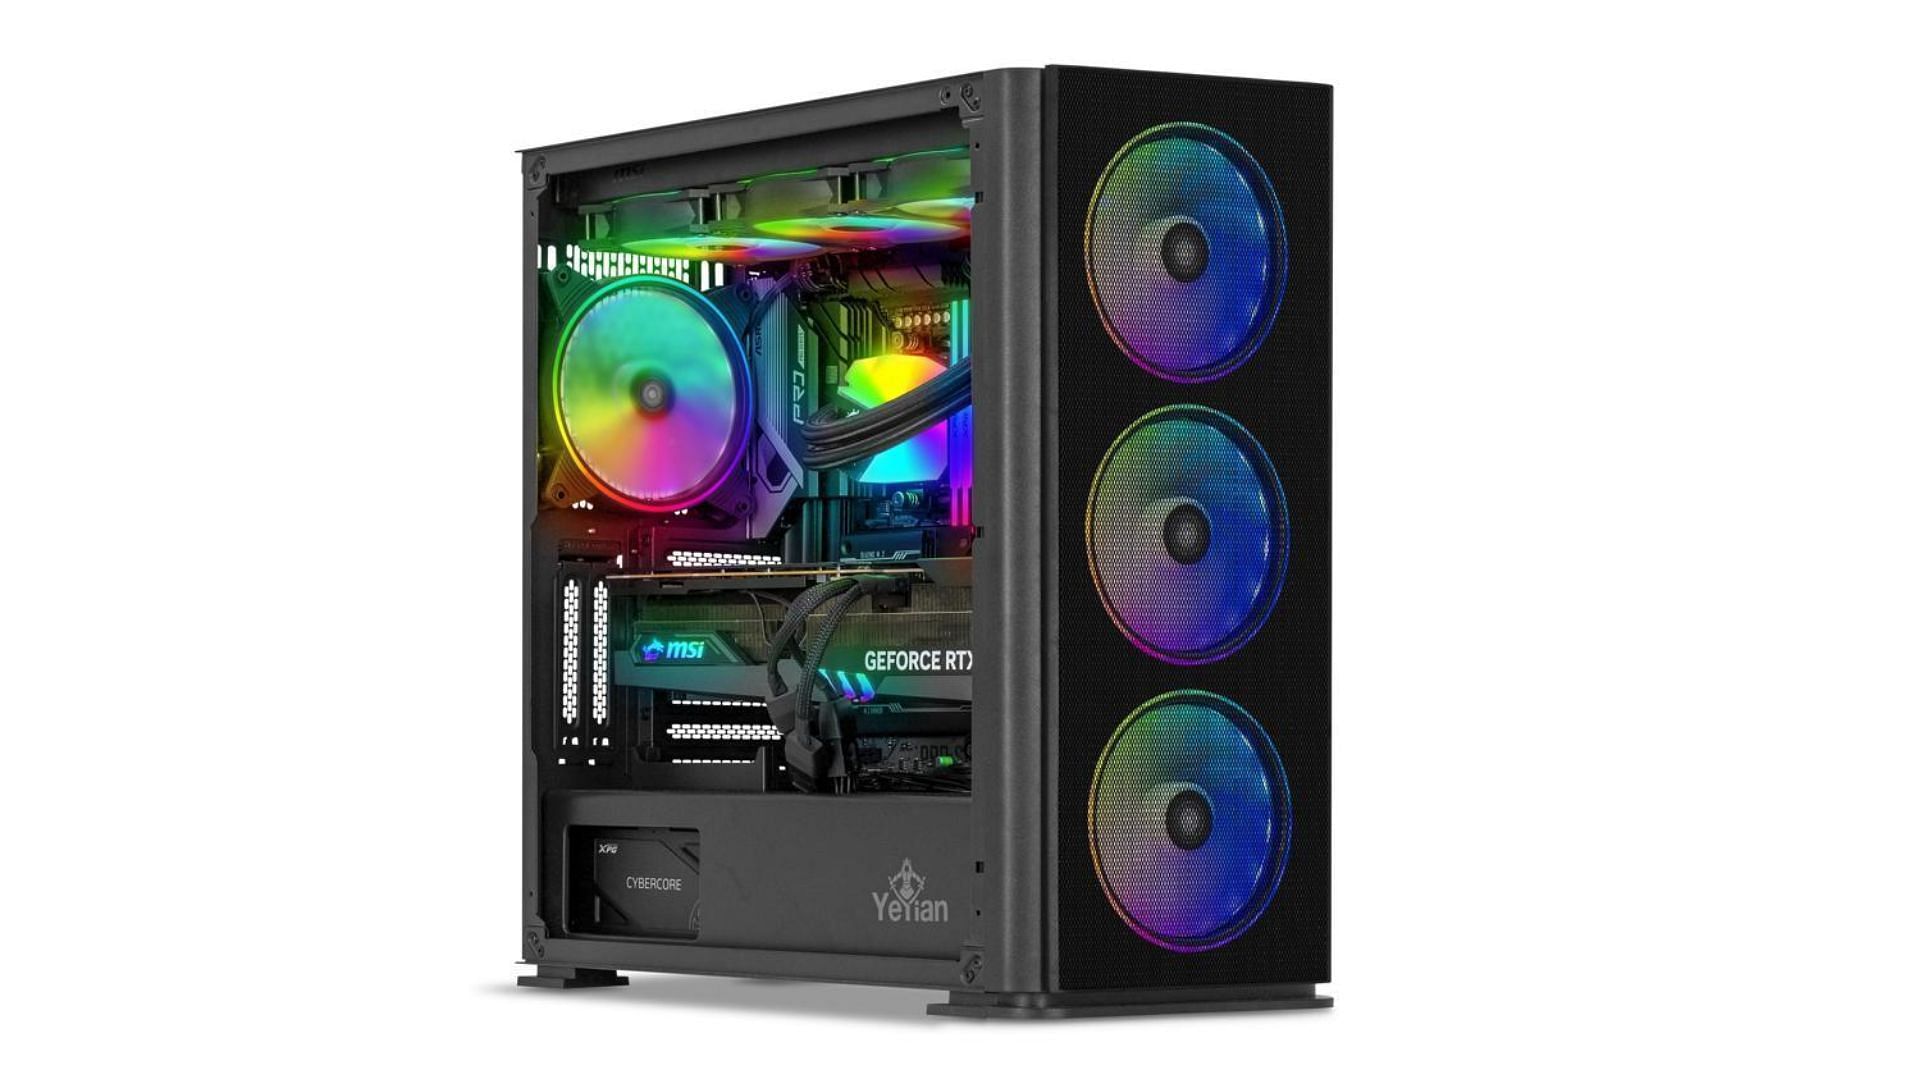 The Yeyian Odachi is a superb high-performance gaming pre-built (Image via Newegg)